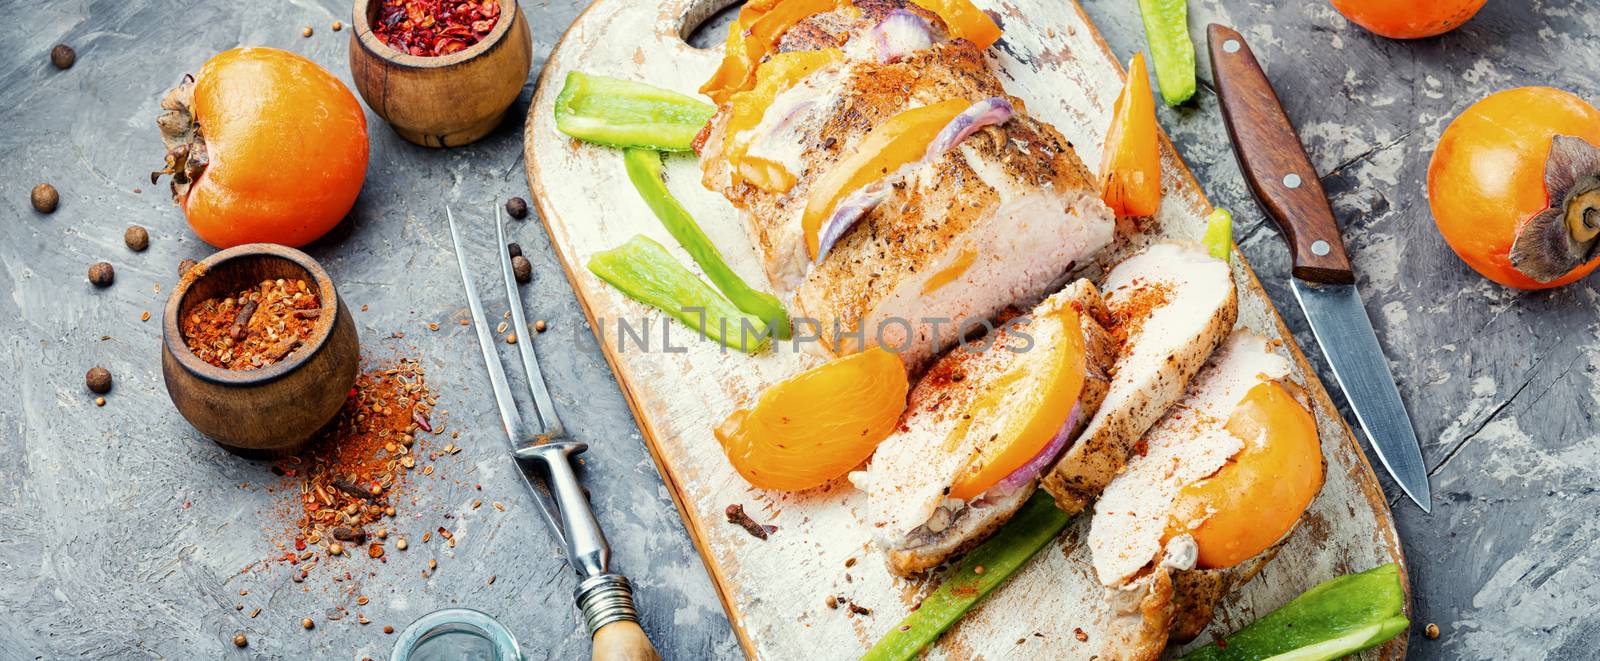 Sliced baked pork with on cutting board